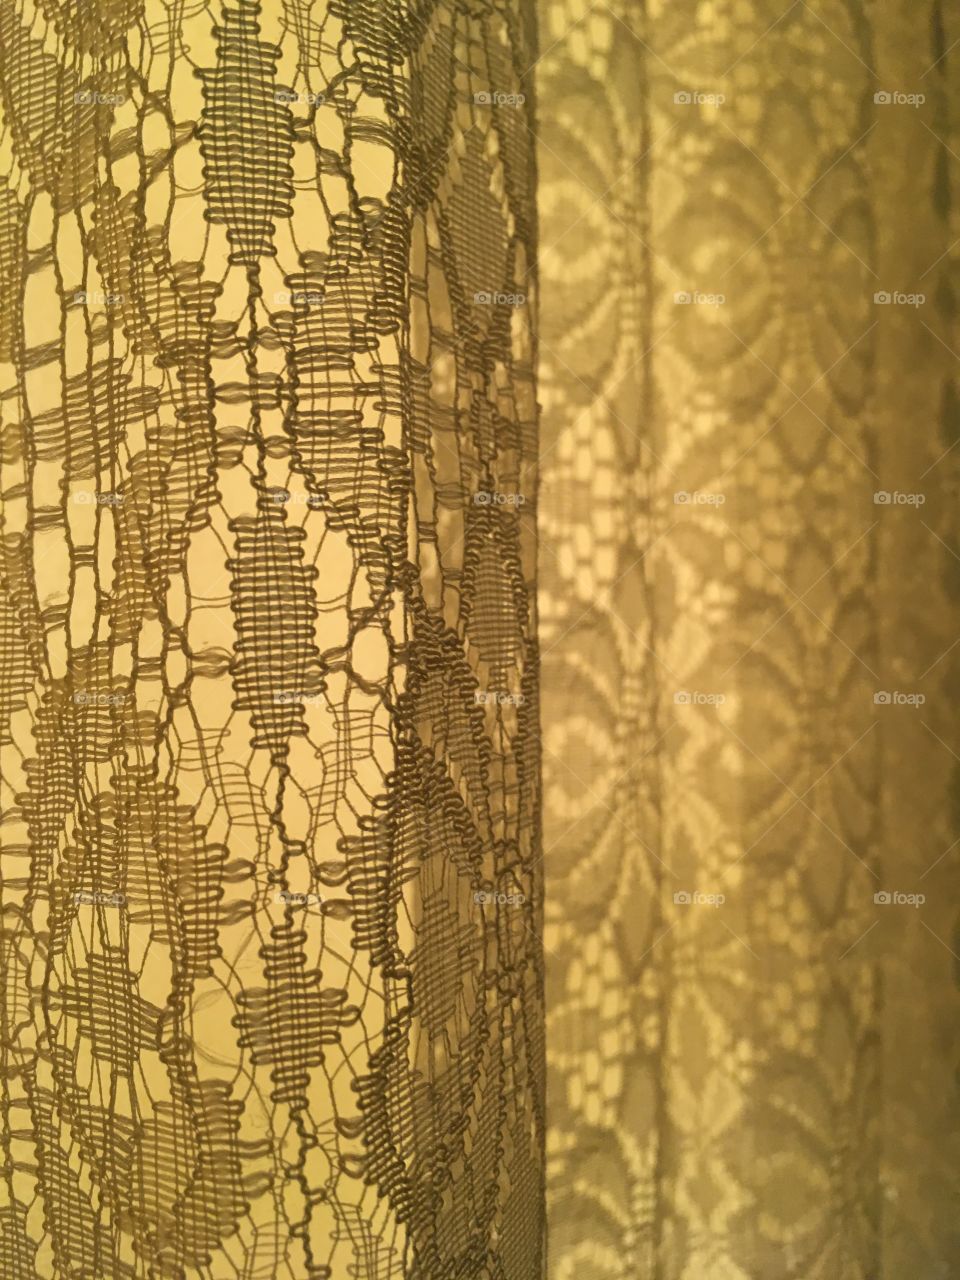 Lace curtains